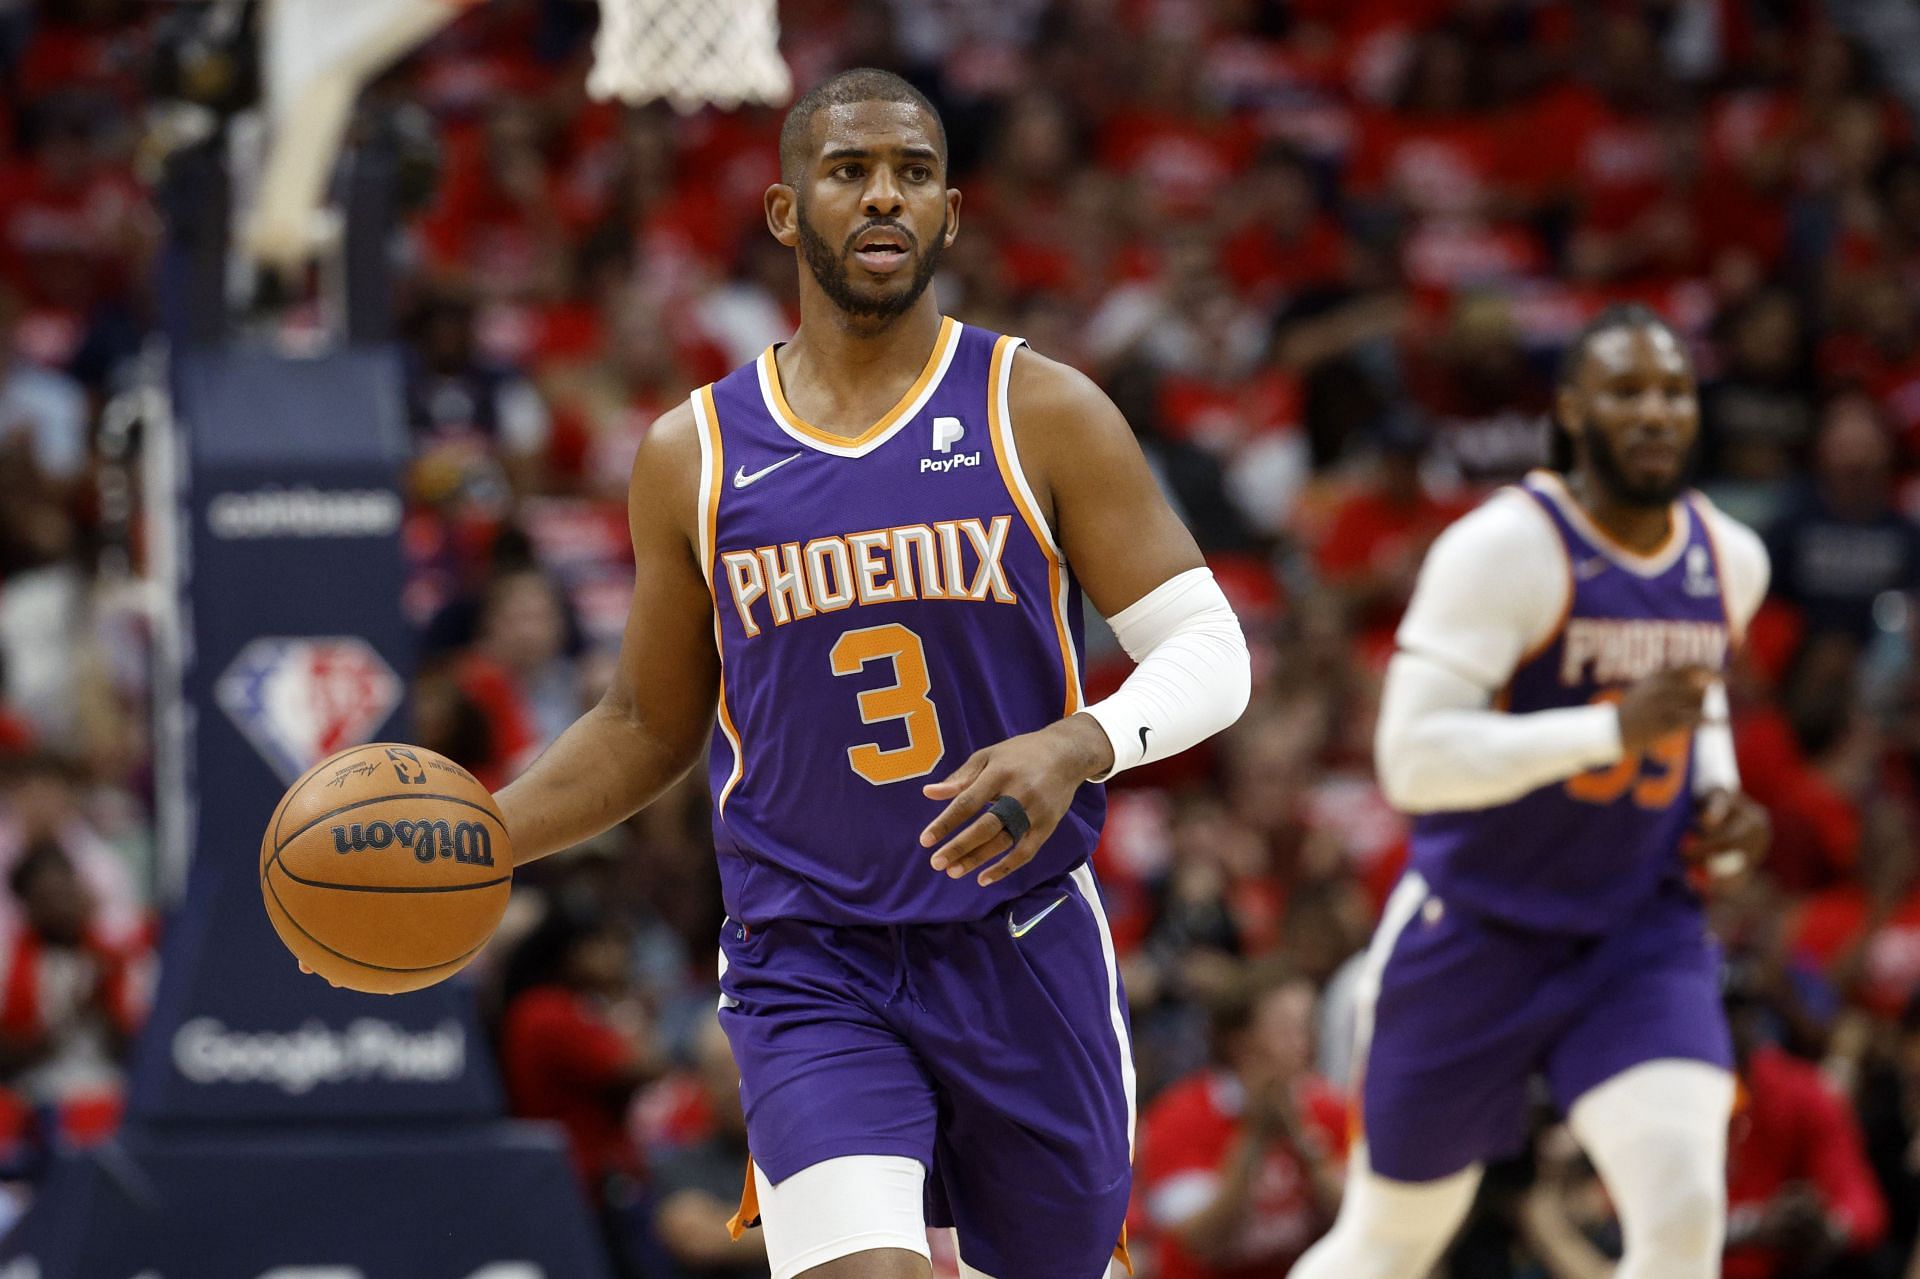 Chris Paul of the Phoenix Suns drives against the New Orleans Pelicans at Smoothie King Center on Thursday in New Orleans, Louisiana.